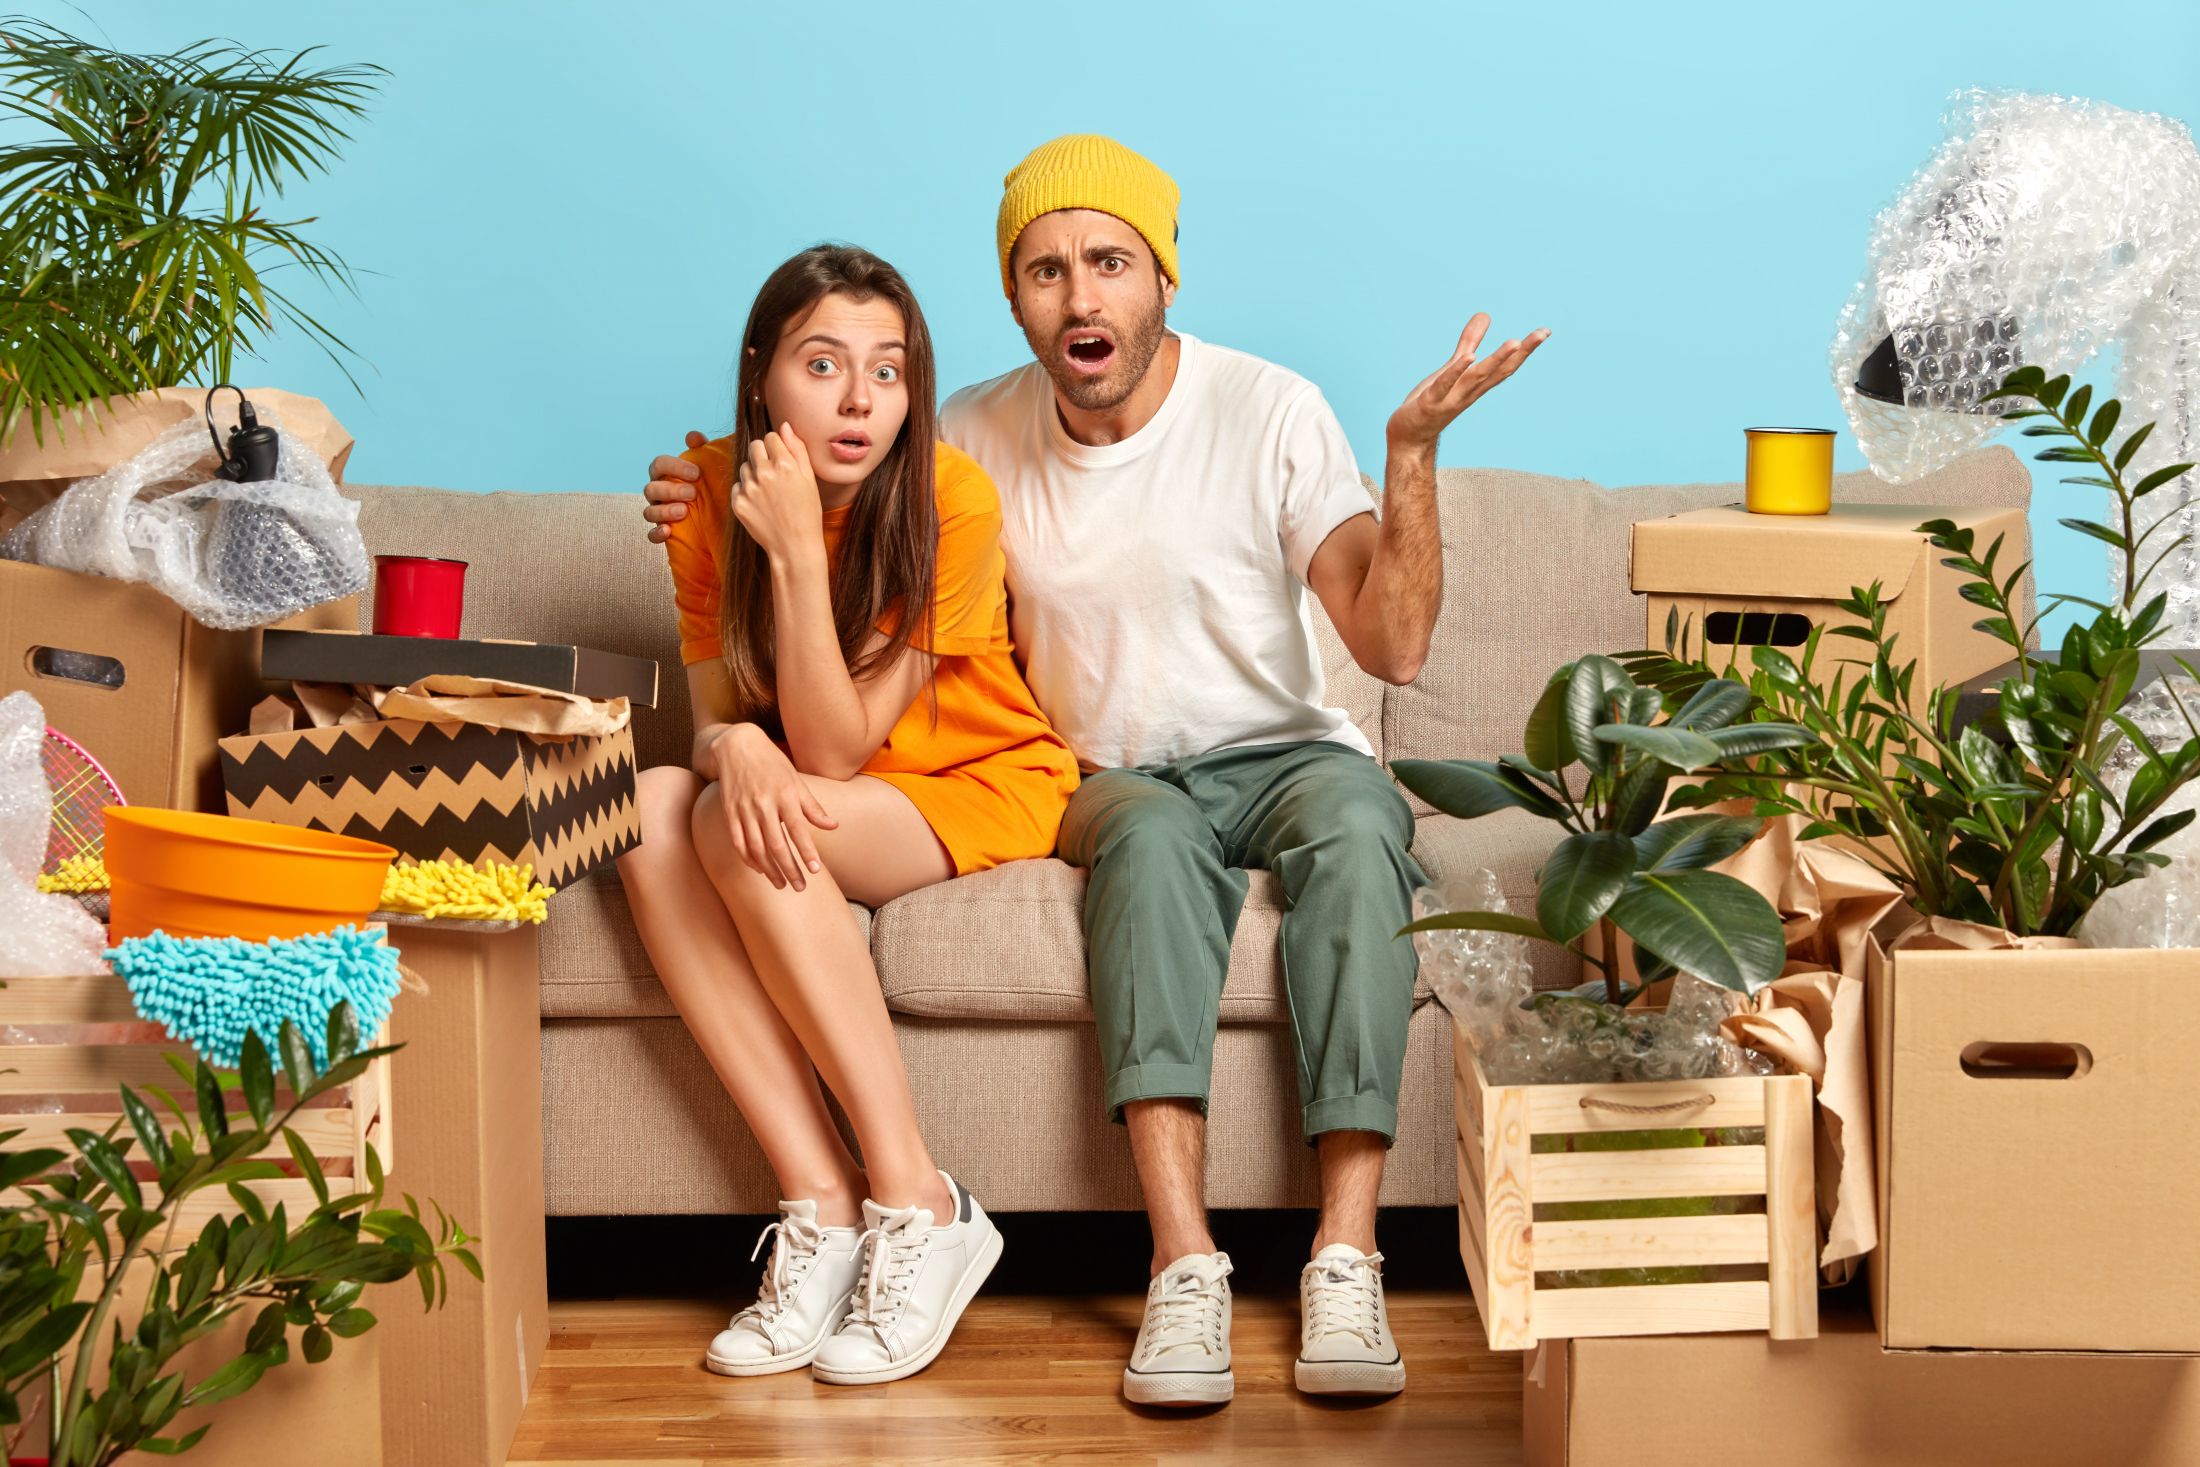 woman-and-man-tenants-pose-at-cozy-sofa-in-empty-messy-room-with-different-household-things-frustrated-guy-looks-with-great-puzzlement-embraces-girlfriend-couple-moves-in-new-flat-for-living.jpg